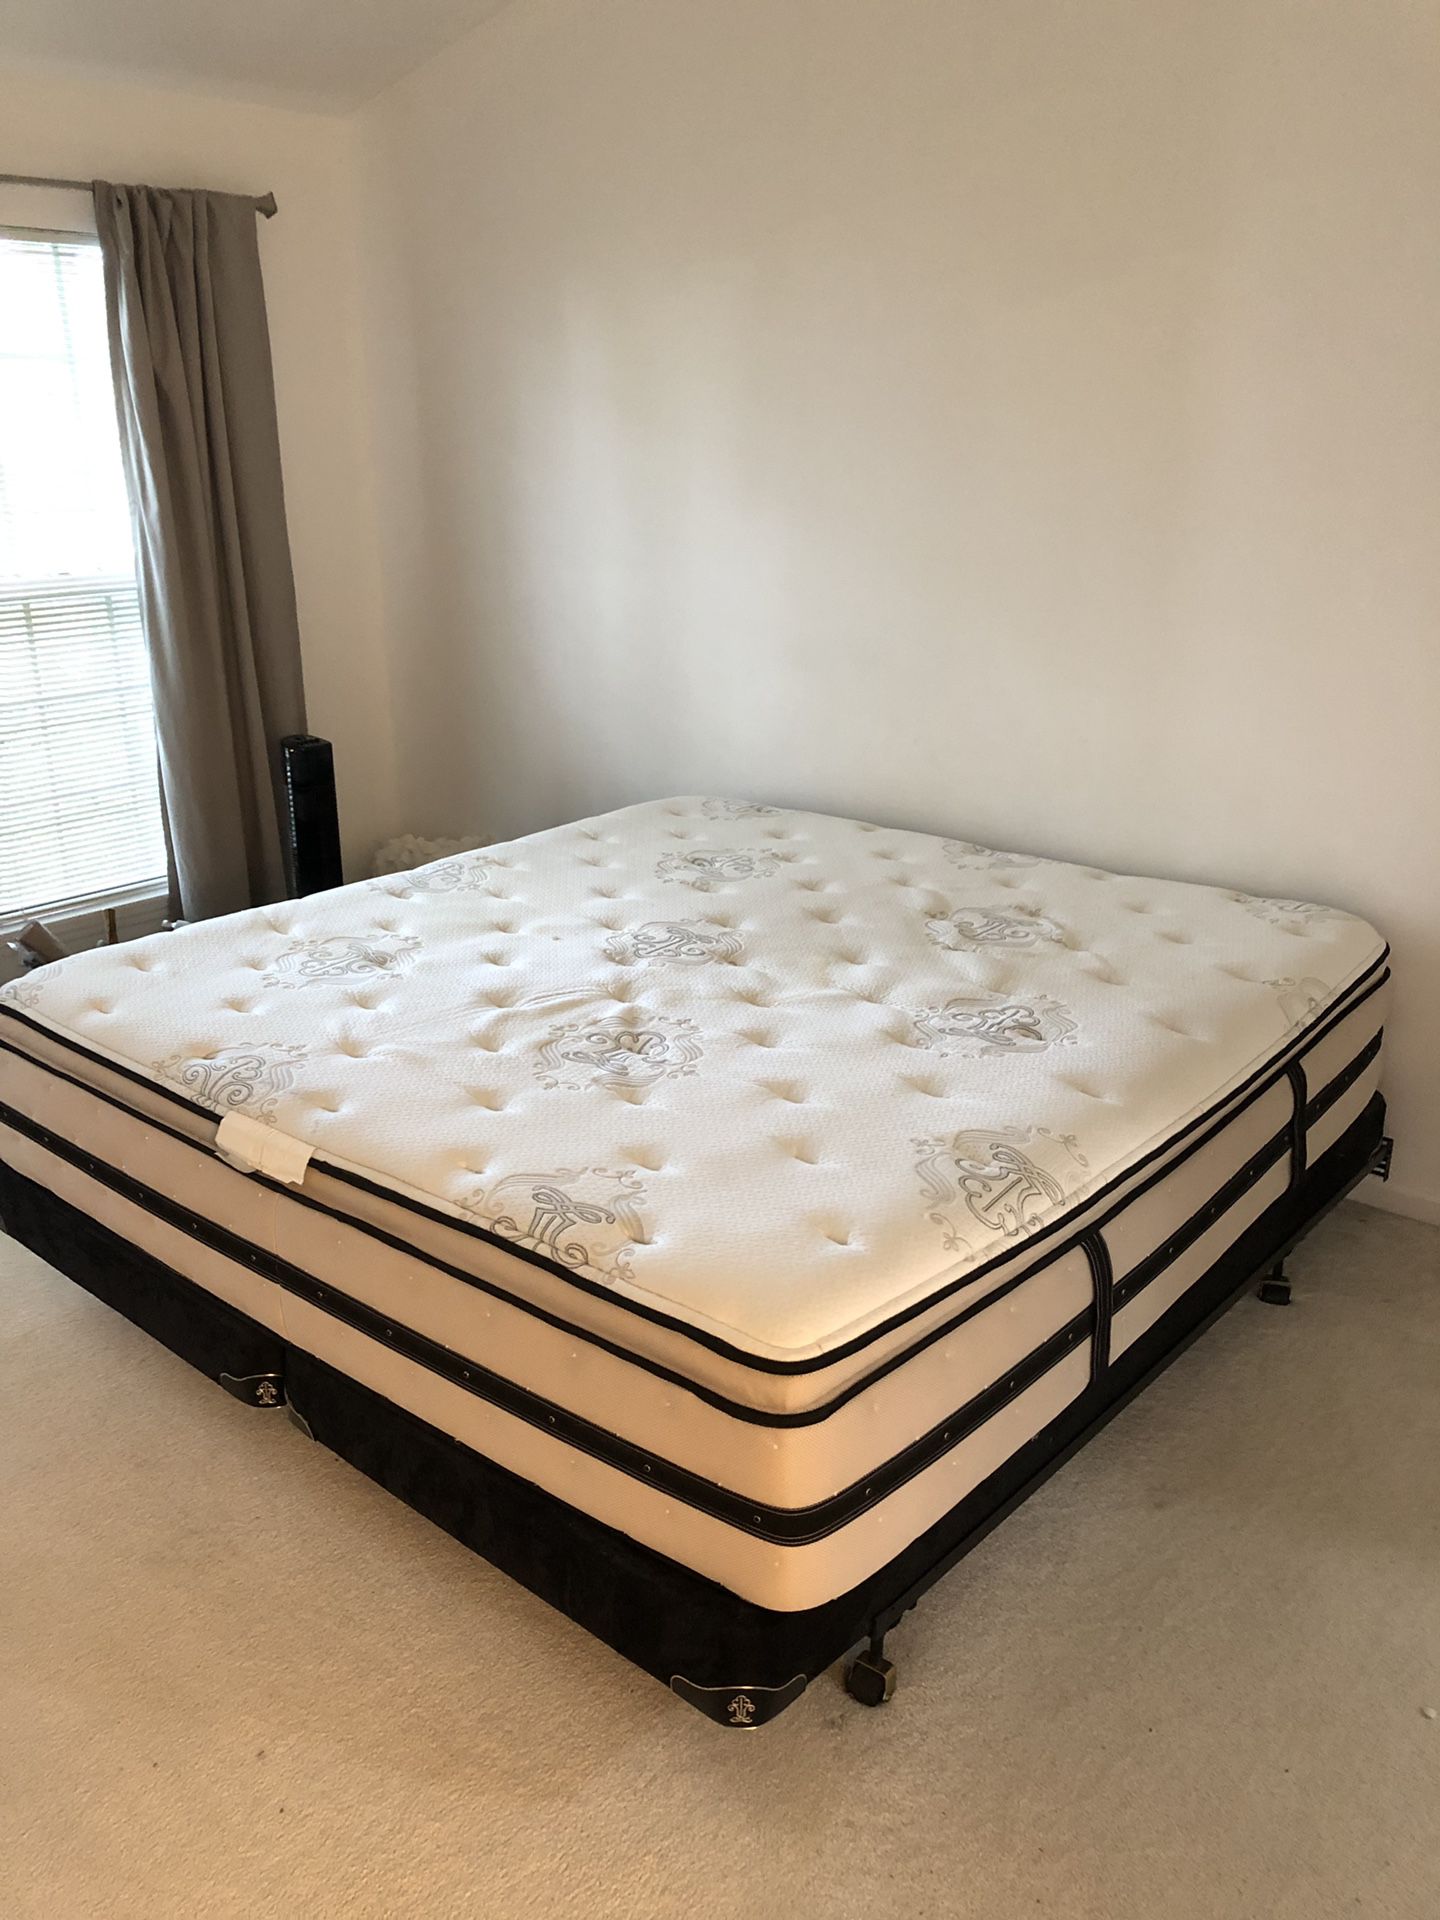 Black Beauty-rest King Mattress with box springs and frame FREE